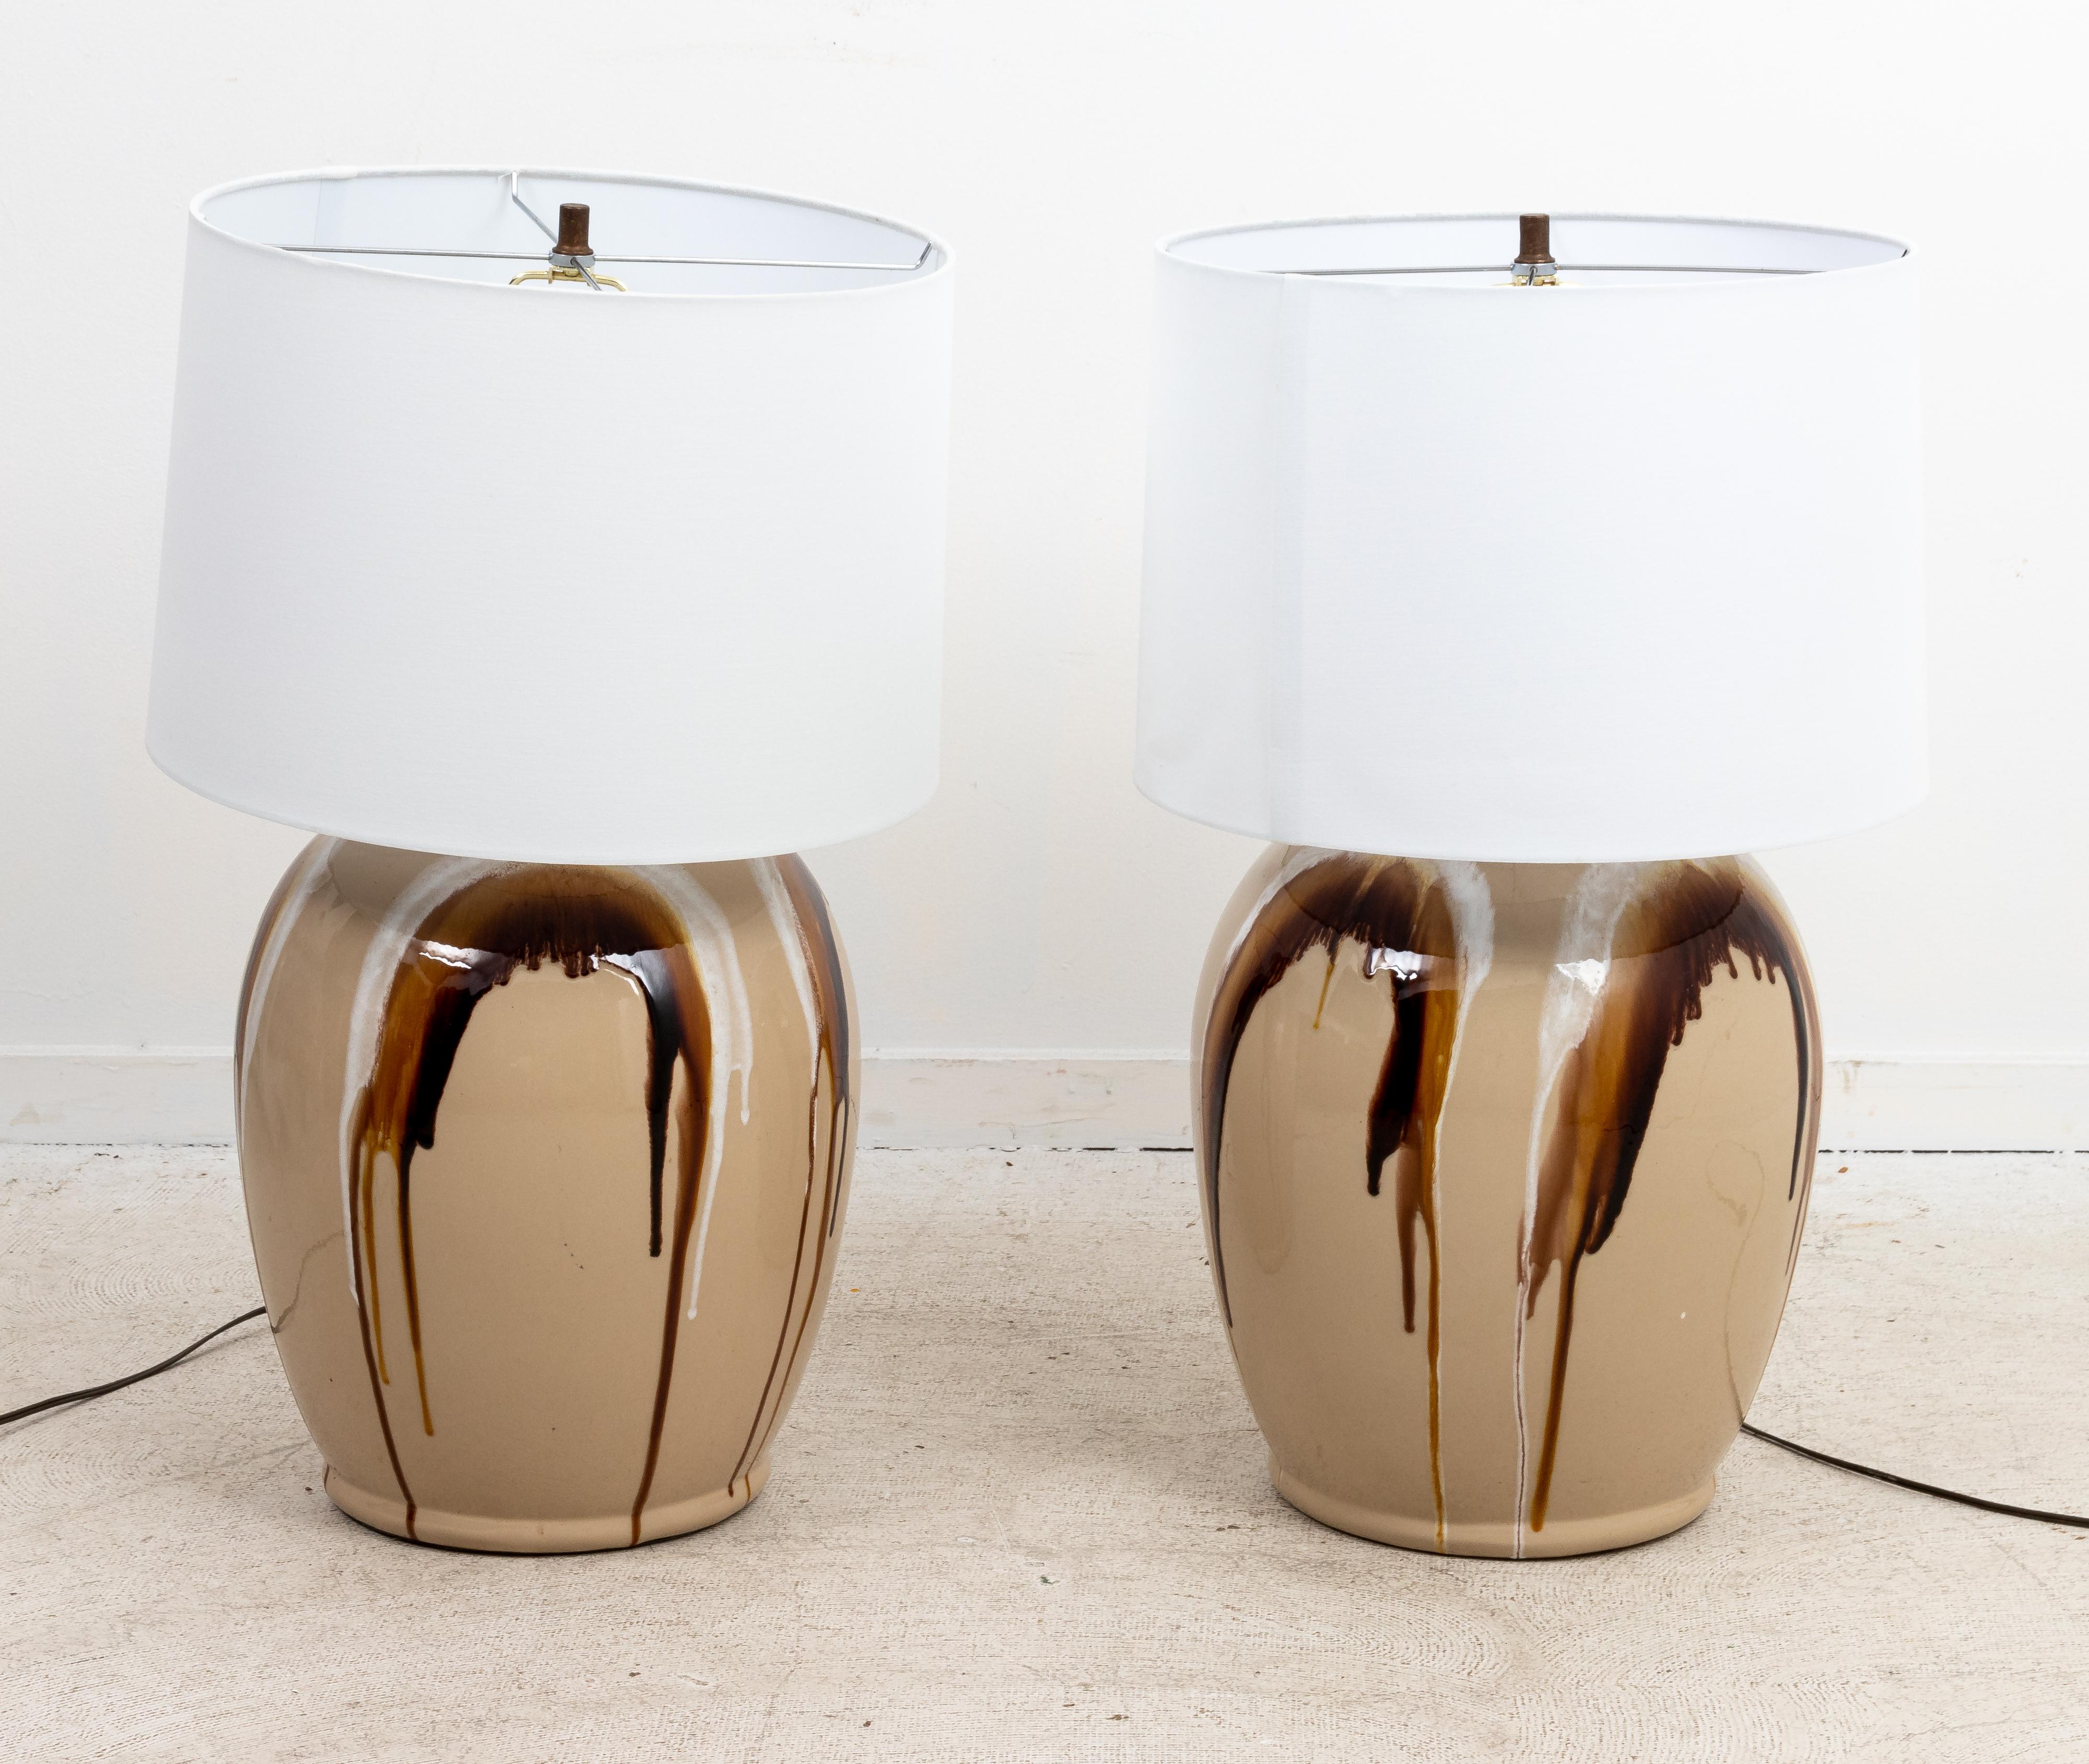 Circa 1970s pair of large Mid-Century Modern style drip glazed ceramic table lamps that measure 23.00 inches height to top of socket. Shades not included.